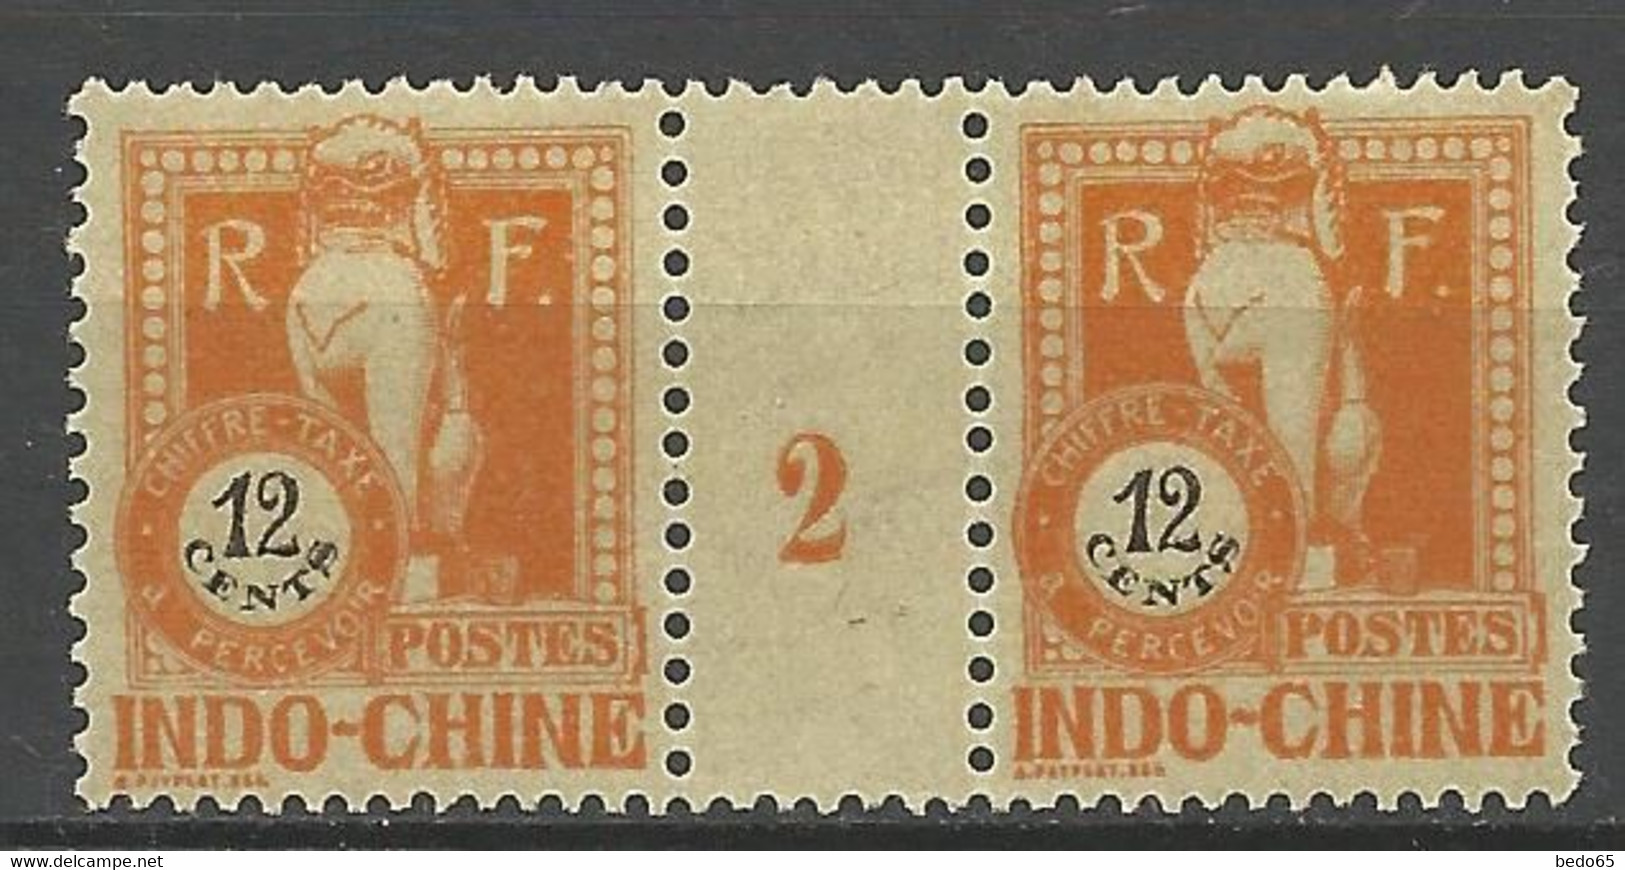 INDOCHINE TAXE N° 40 Gom Coloniale Millésime 2 NEUF**  SANS CHARNIERE  / MNH - Postage Due